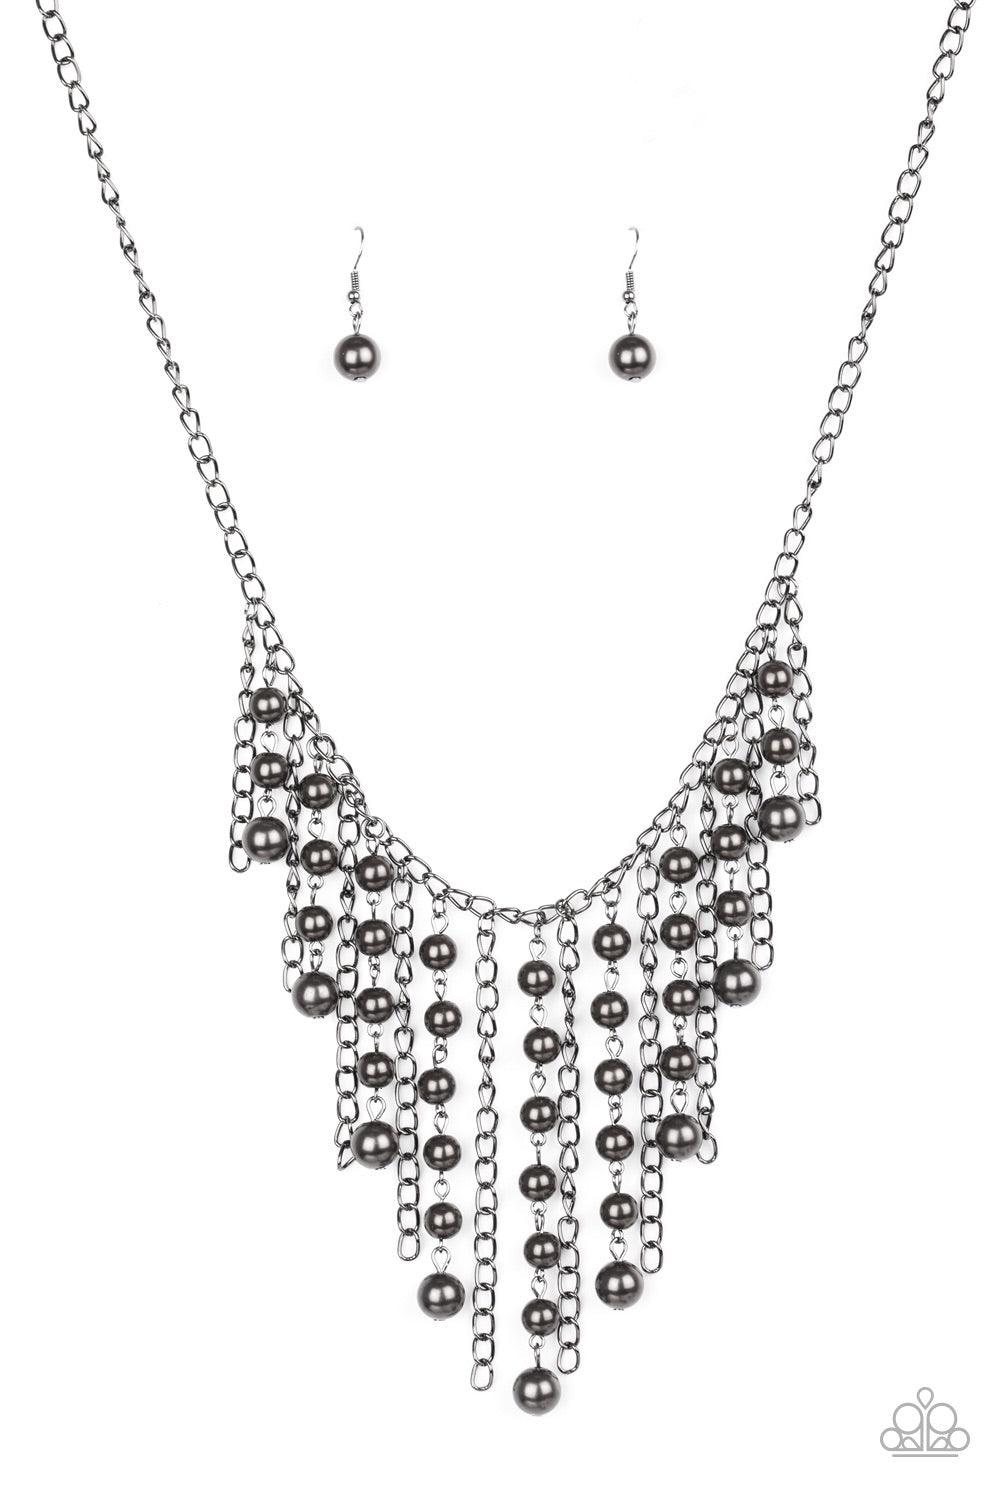 Paparazzi Accessories STUN Control - Black Pearly gunmetal beads trickle along strands of glistening gunmetal chains, creating a tapered fringe below the collar. Features an adjustable clasp closure. Jewelry